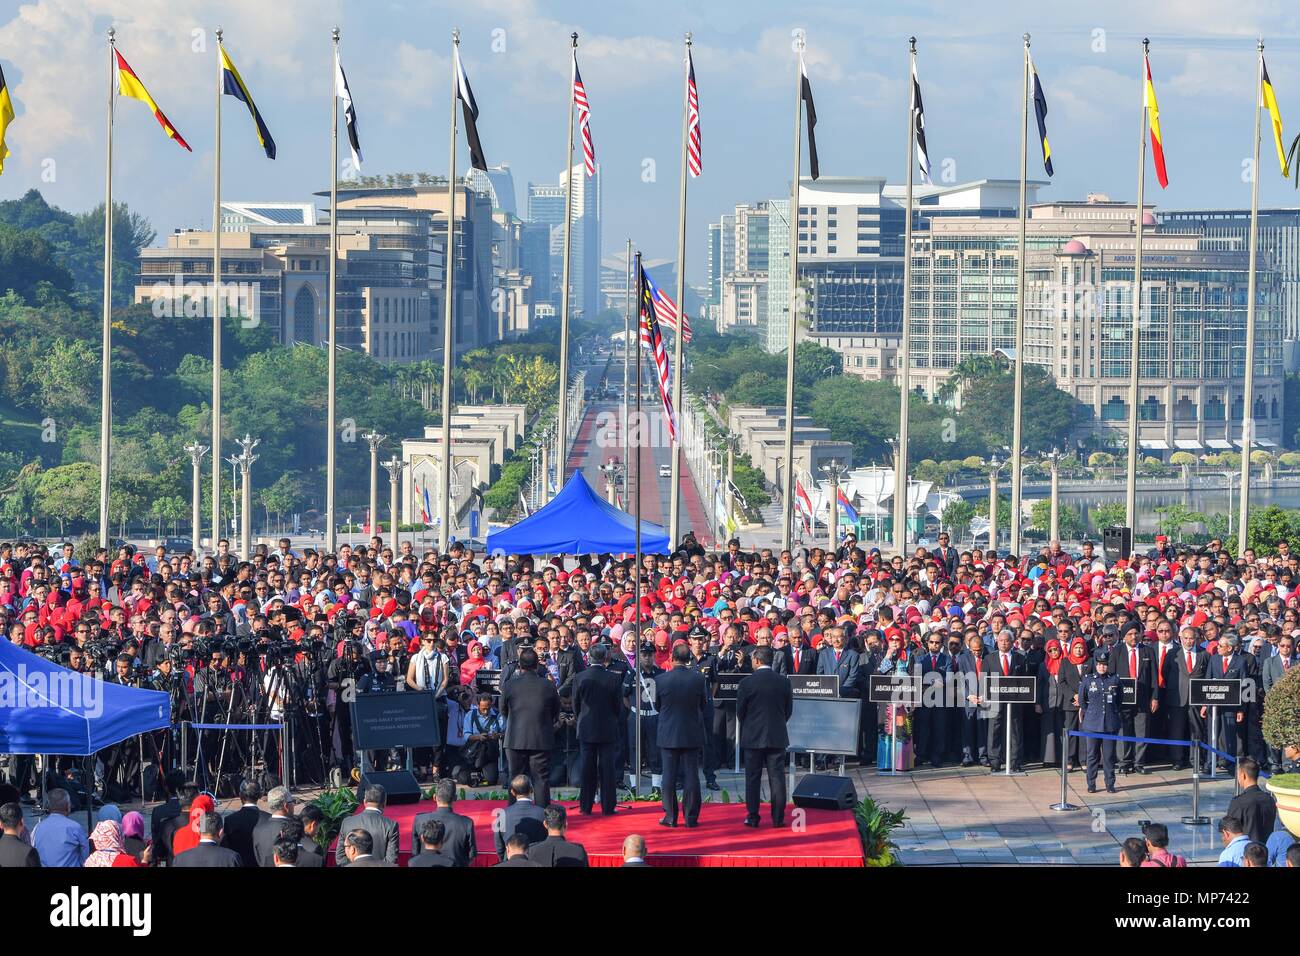 Kuala Lumpur, Malaysia. 21st May, 2018. Malaysian Prime Minister Mahathir Mohamad addresses civil servants at the Prime Minister's Office in Putrajaya, Malaysia, May 21, 2018. Core members of the cabinet led by newly elected Malaysian Prime Minister Mahathir Mohamad were sworn in on Monday, as the 92-year-old leader vowed to restore the former glory of the country. Credit: Chong Voon Chung/Xinhua/Alamy Live News Stock Photo